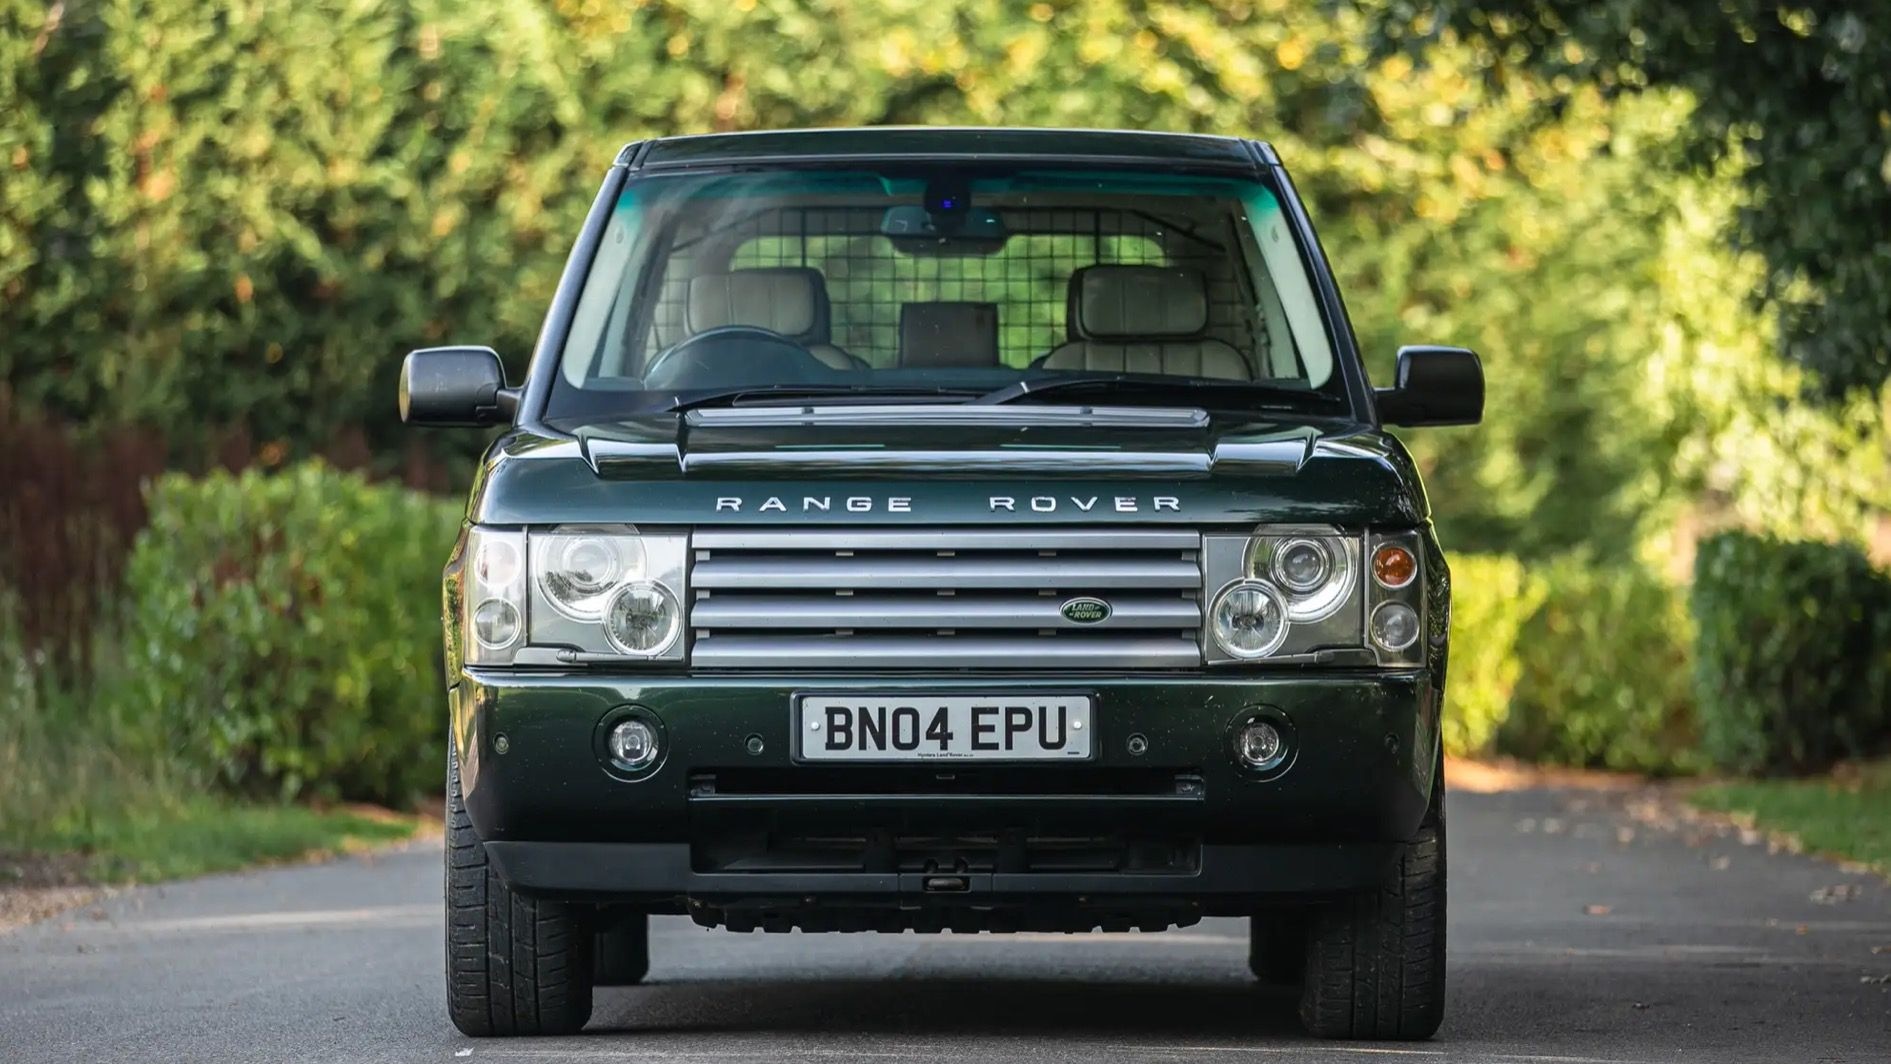 2004 Land Rover Range Rover formerly owned by Queen Elizabeth II (photo via Iconic Auctioneers)